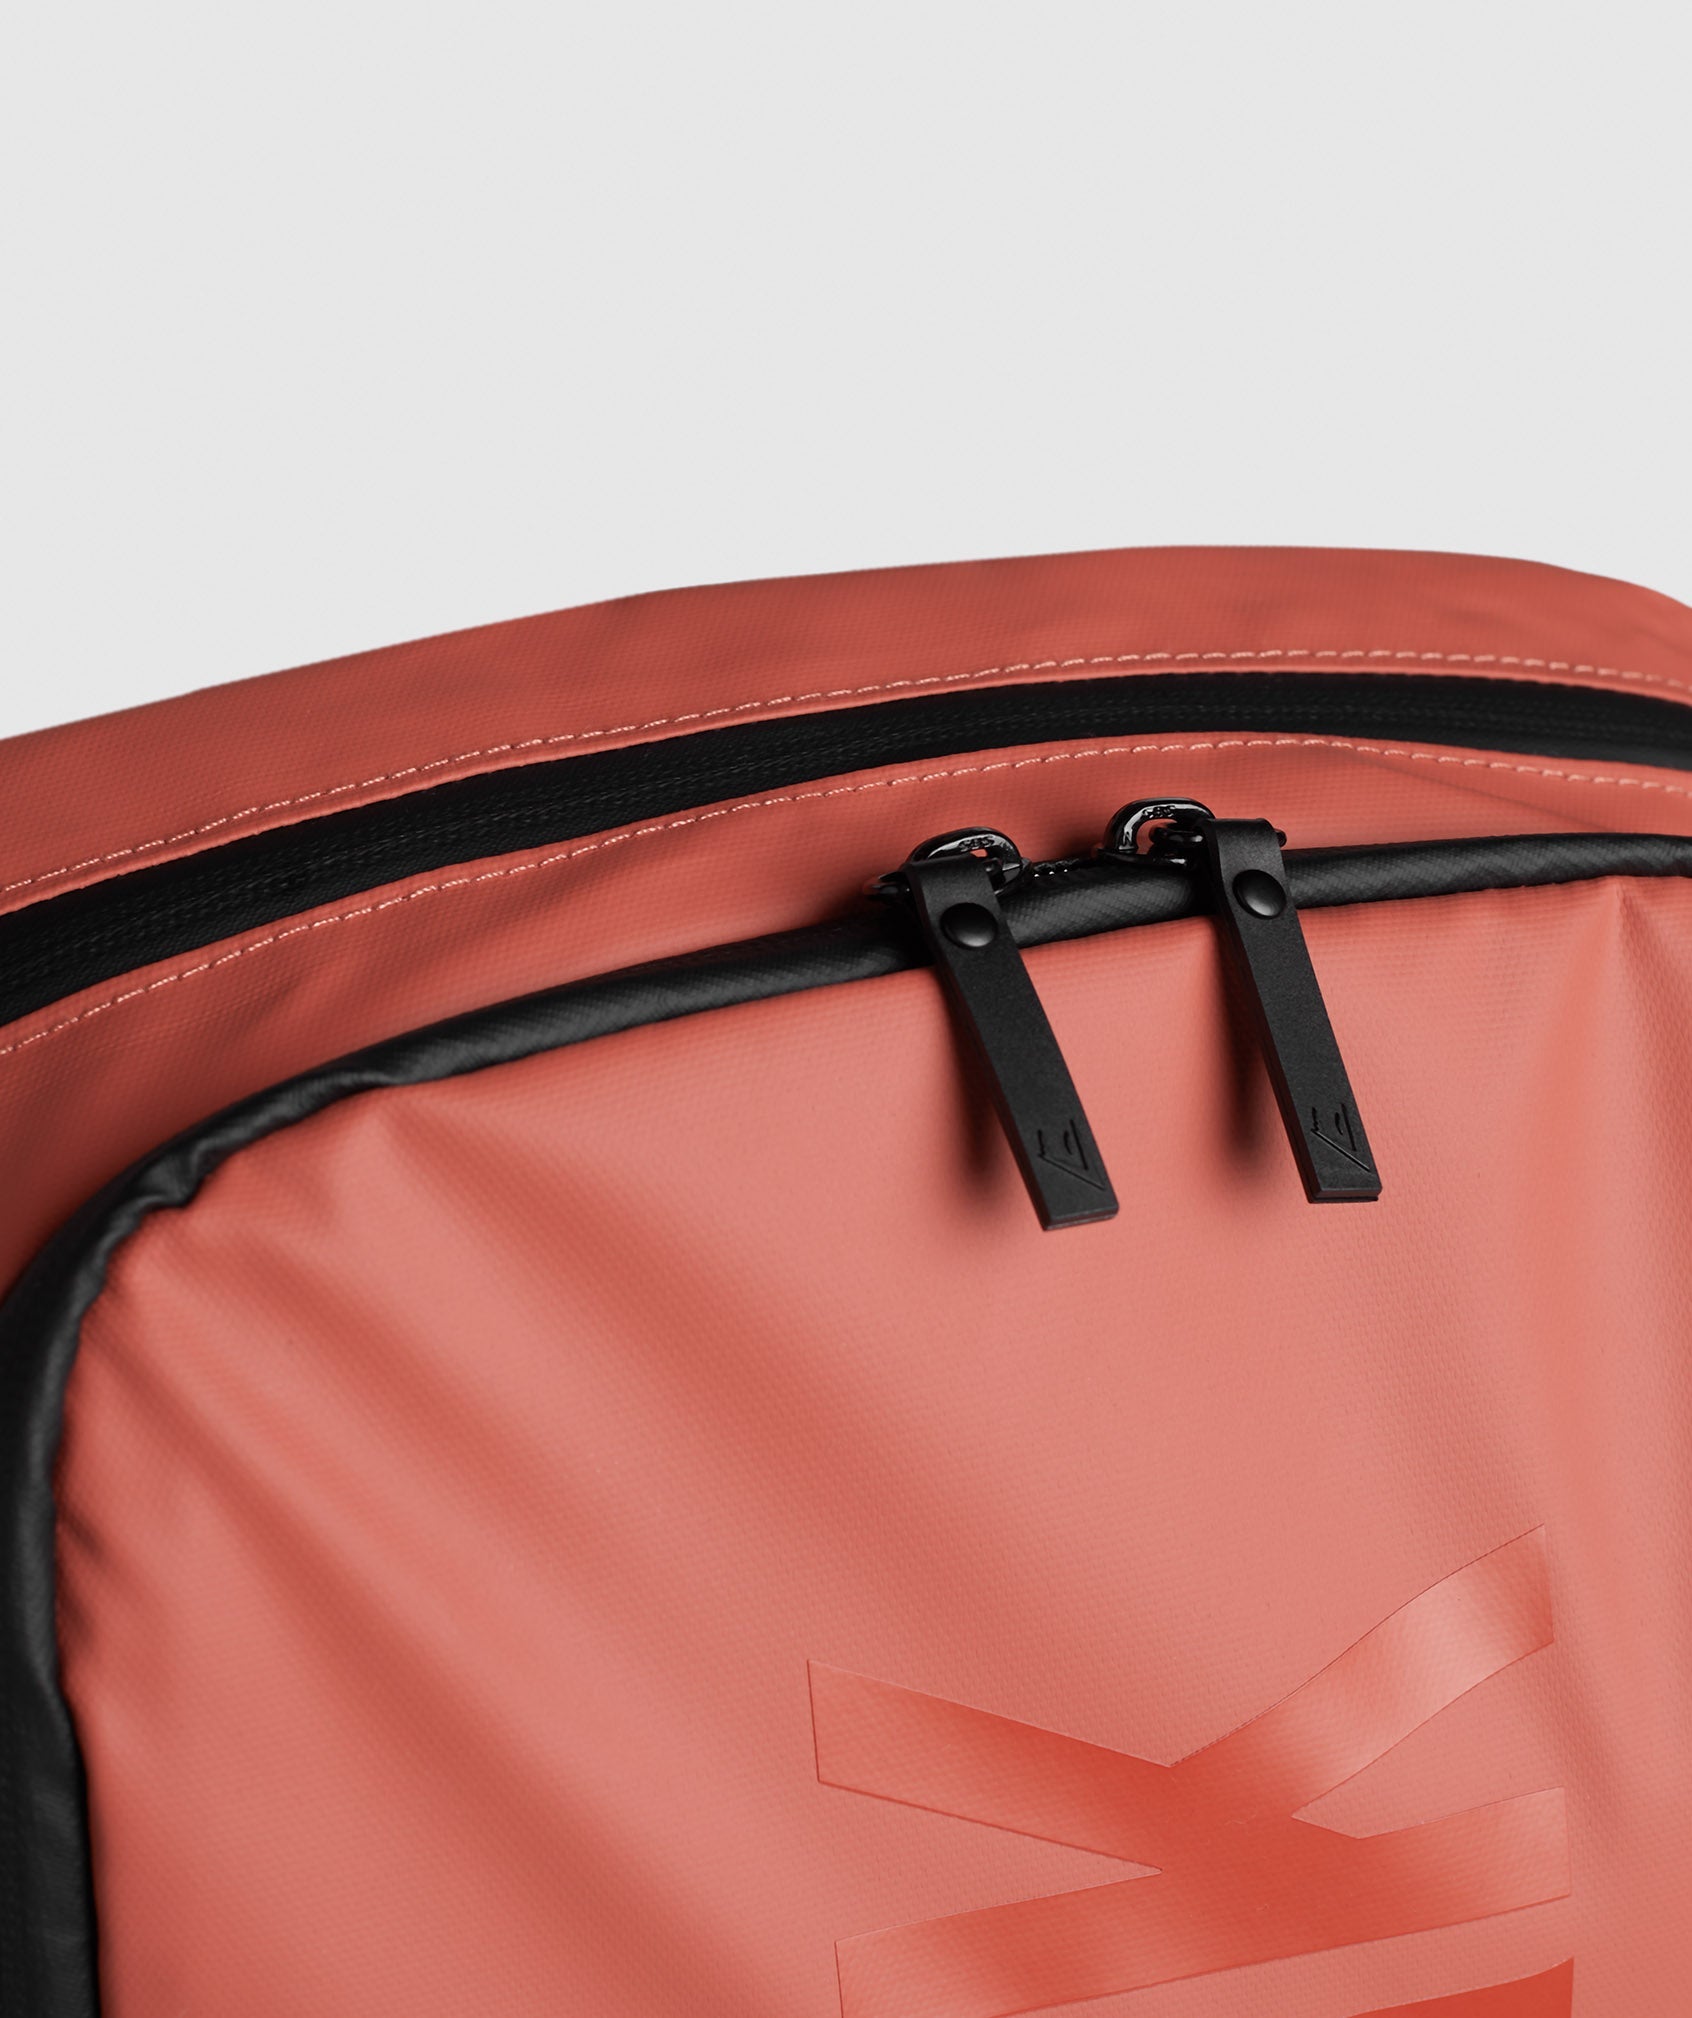 X-Series 0.3 Backpack in Persimmon Red - view 6